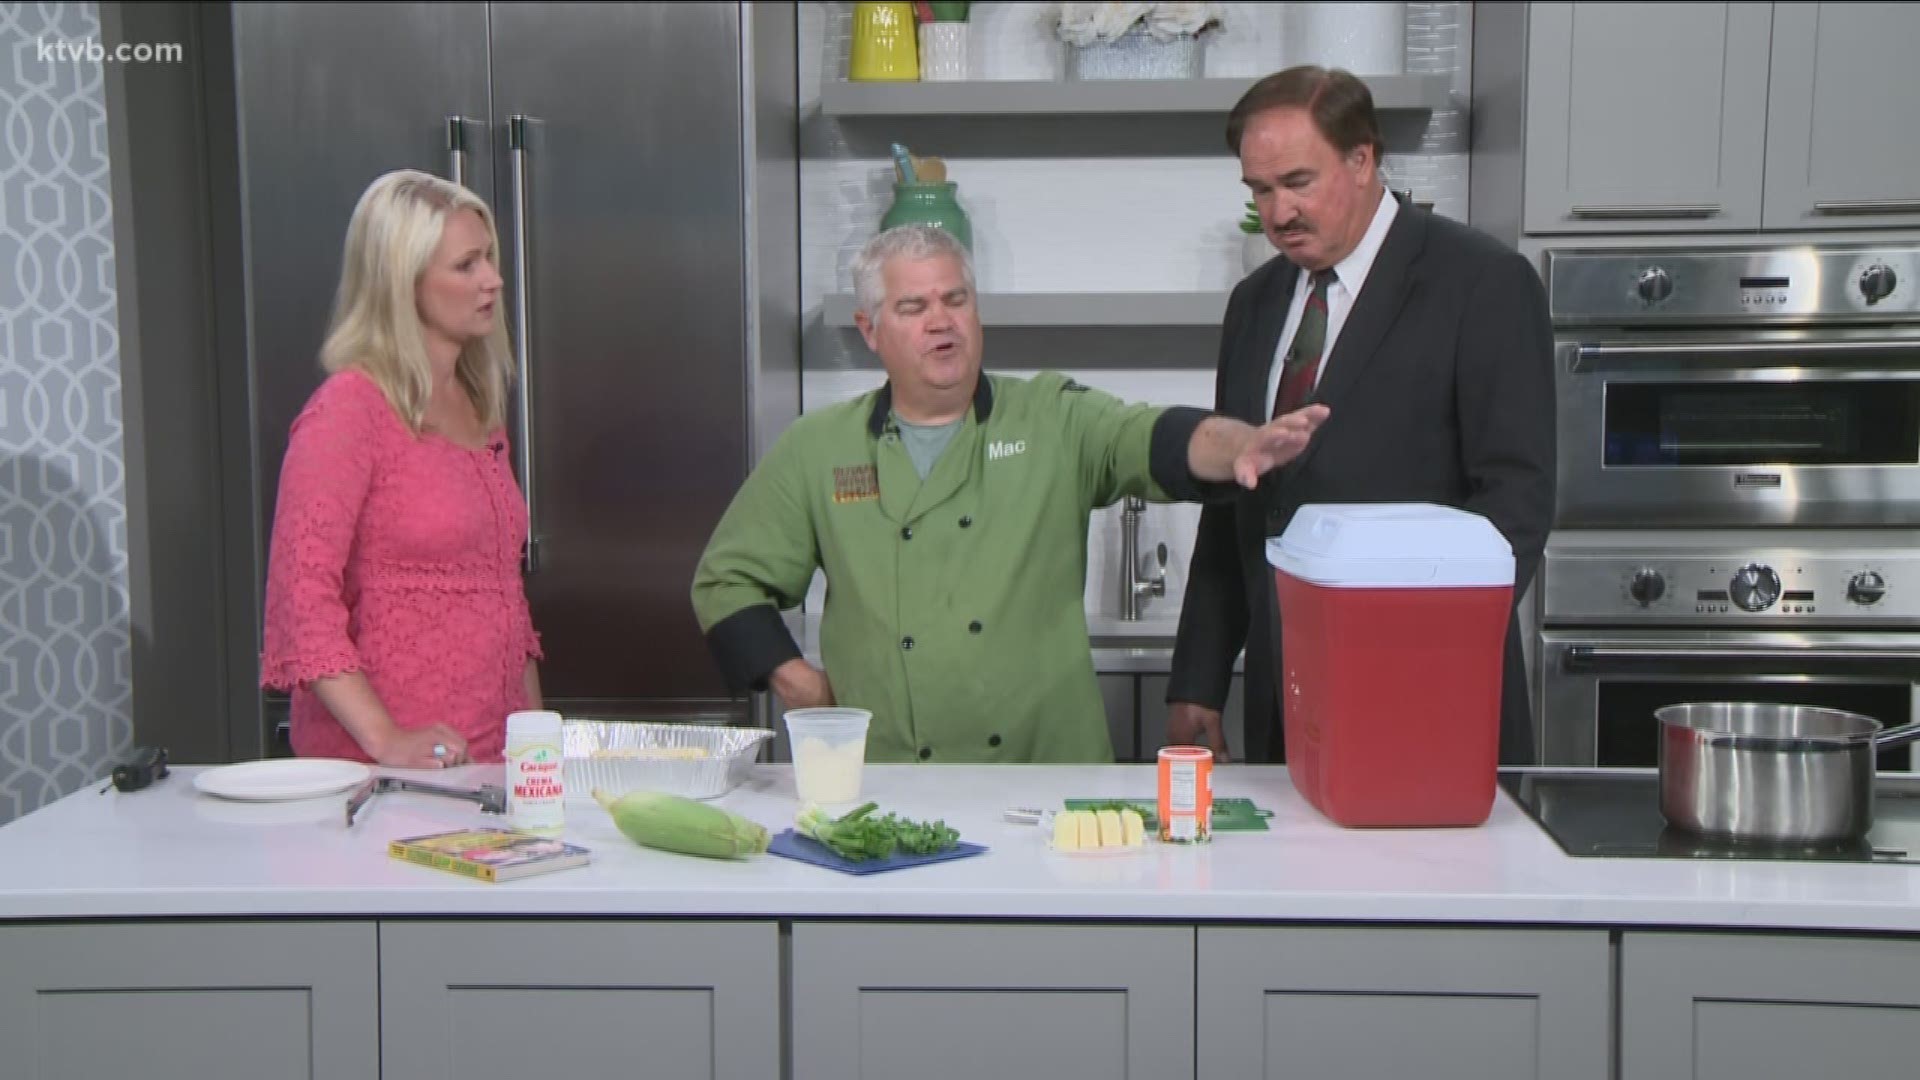 Pat Mac shows us how to cook corn in a cooler for a big group.